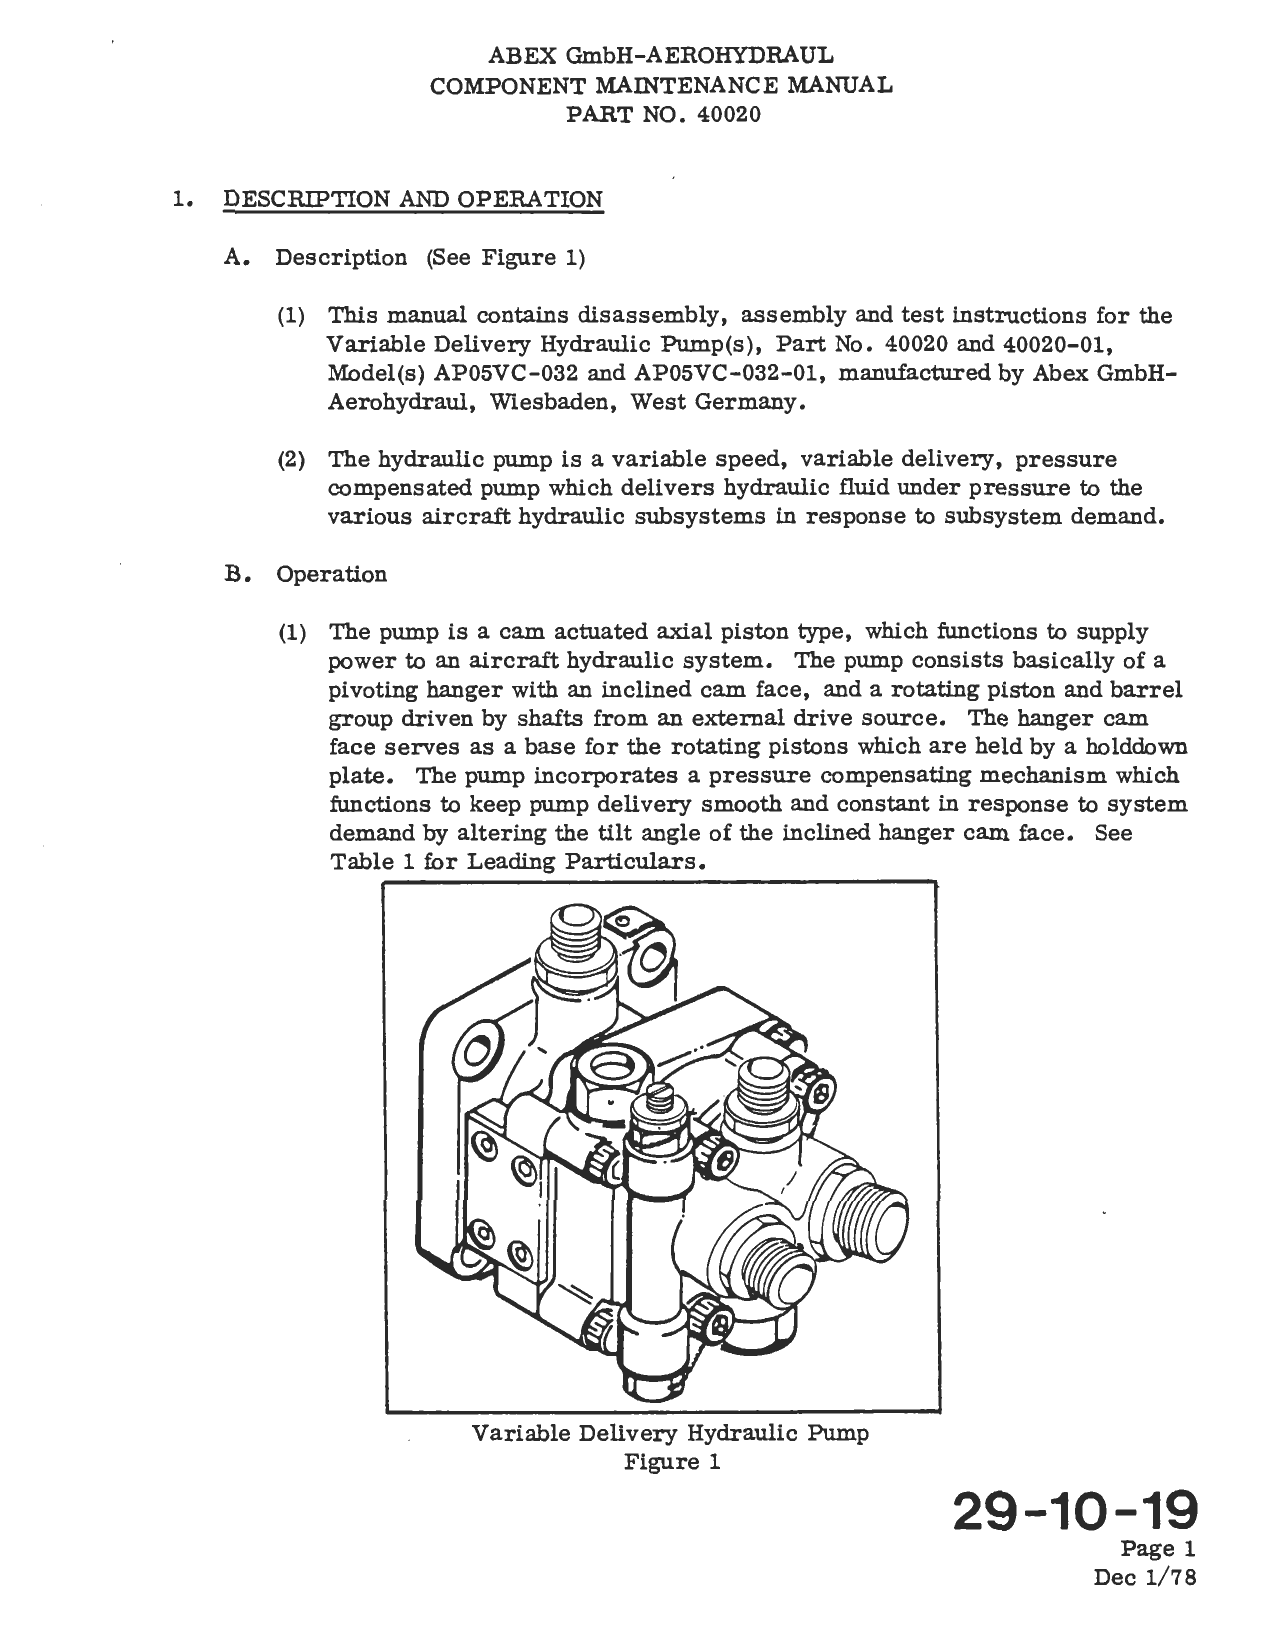 Sample page 7 from AirCorps Library document: Maintenance Manual with Illustrated Parts List for Variable Delivery Hydraulic Pump - Model AP05VC-032 and AP05VC-032-01